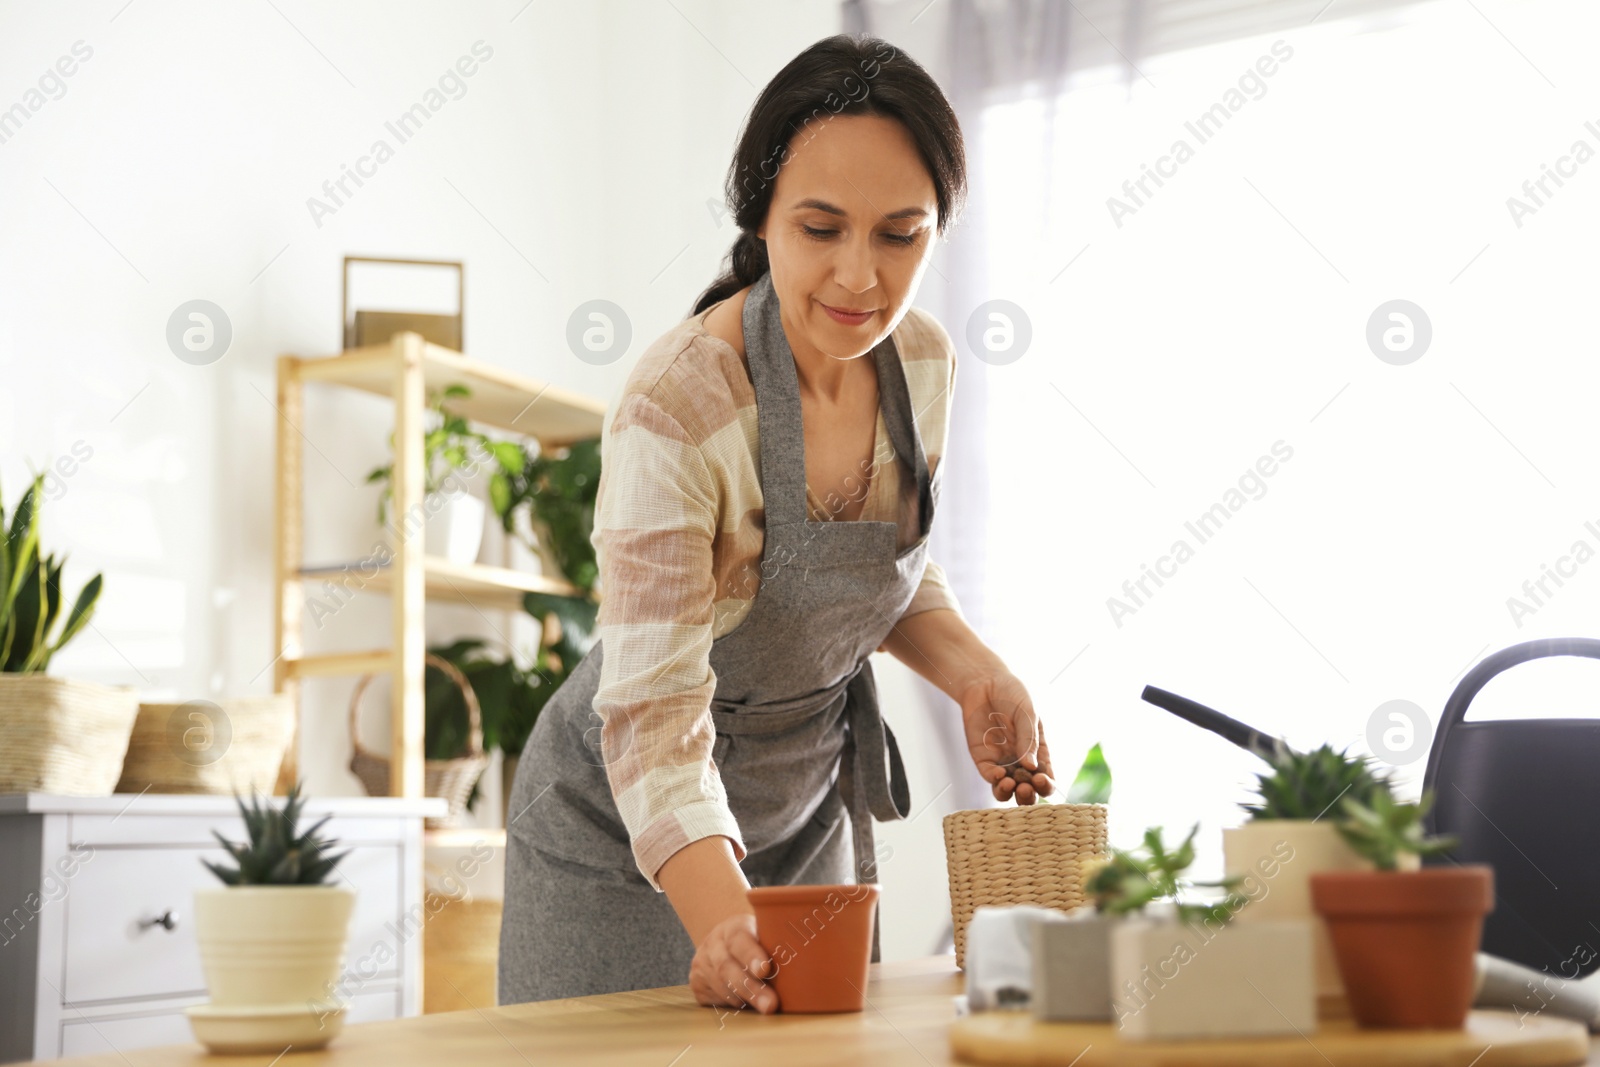 Photo of Mature woman potting plant at home. Engaging hobby